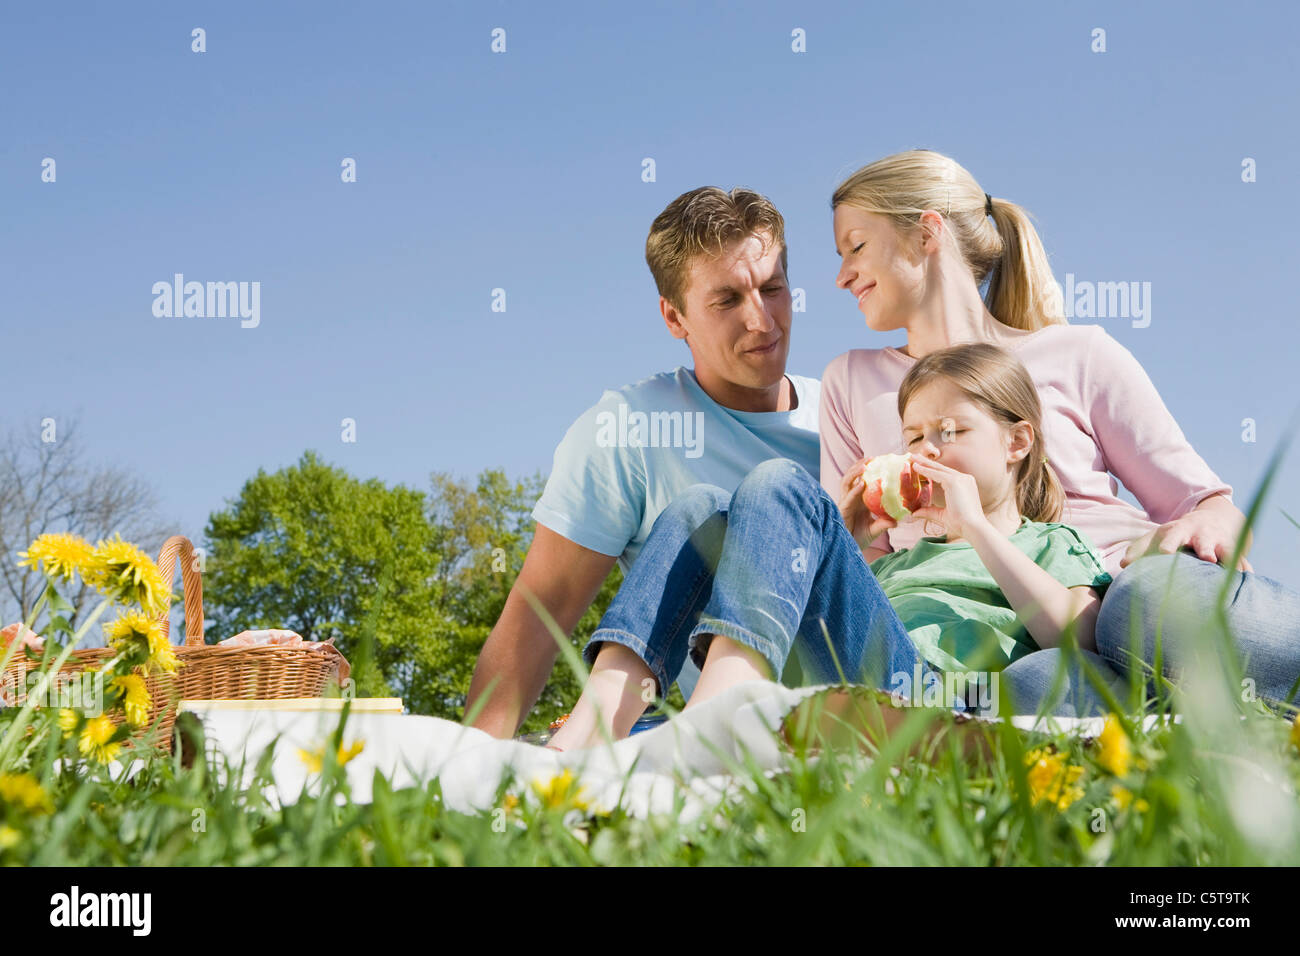 Germany, Bavaria, Munich, Family having picnic, girl (6-7) holding an apple, portrait Banque D'Images